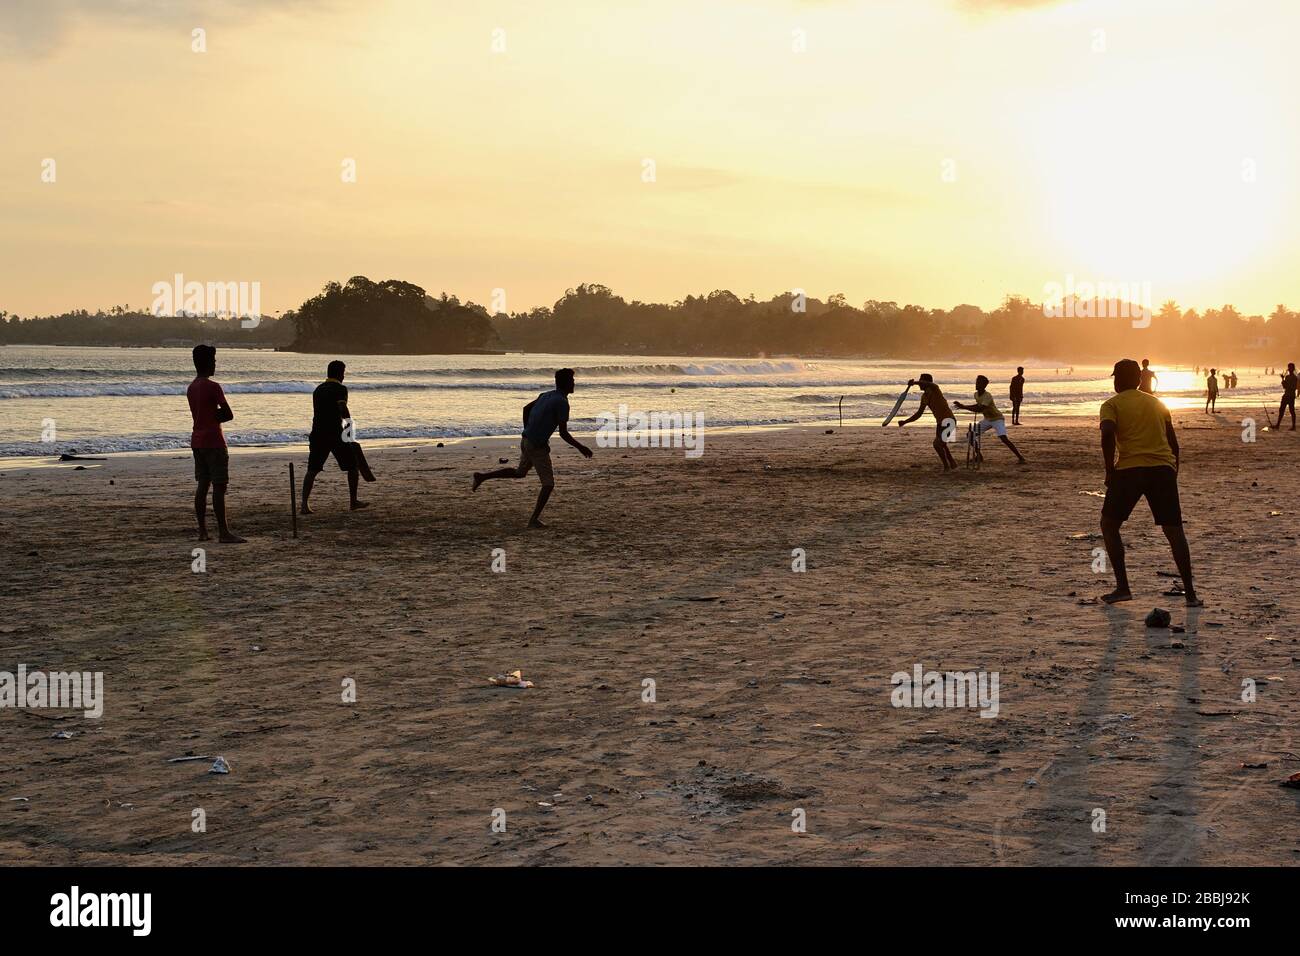 Young boys playing cricket game on a beach. Silhouettes of young  boys having fun on Sri Lanka beach. Golden sunset light with sunbeams in Weligama Stock Photo